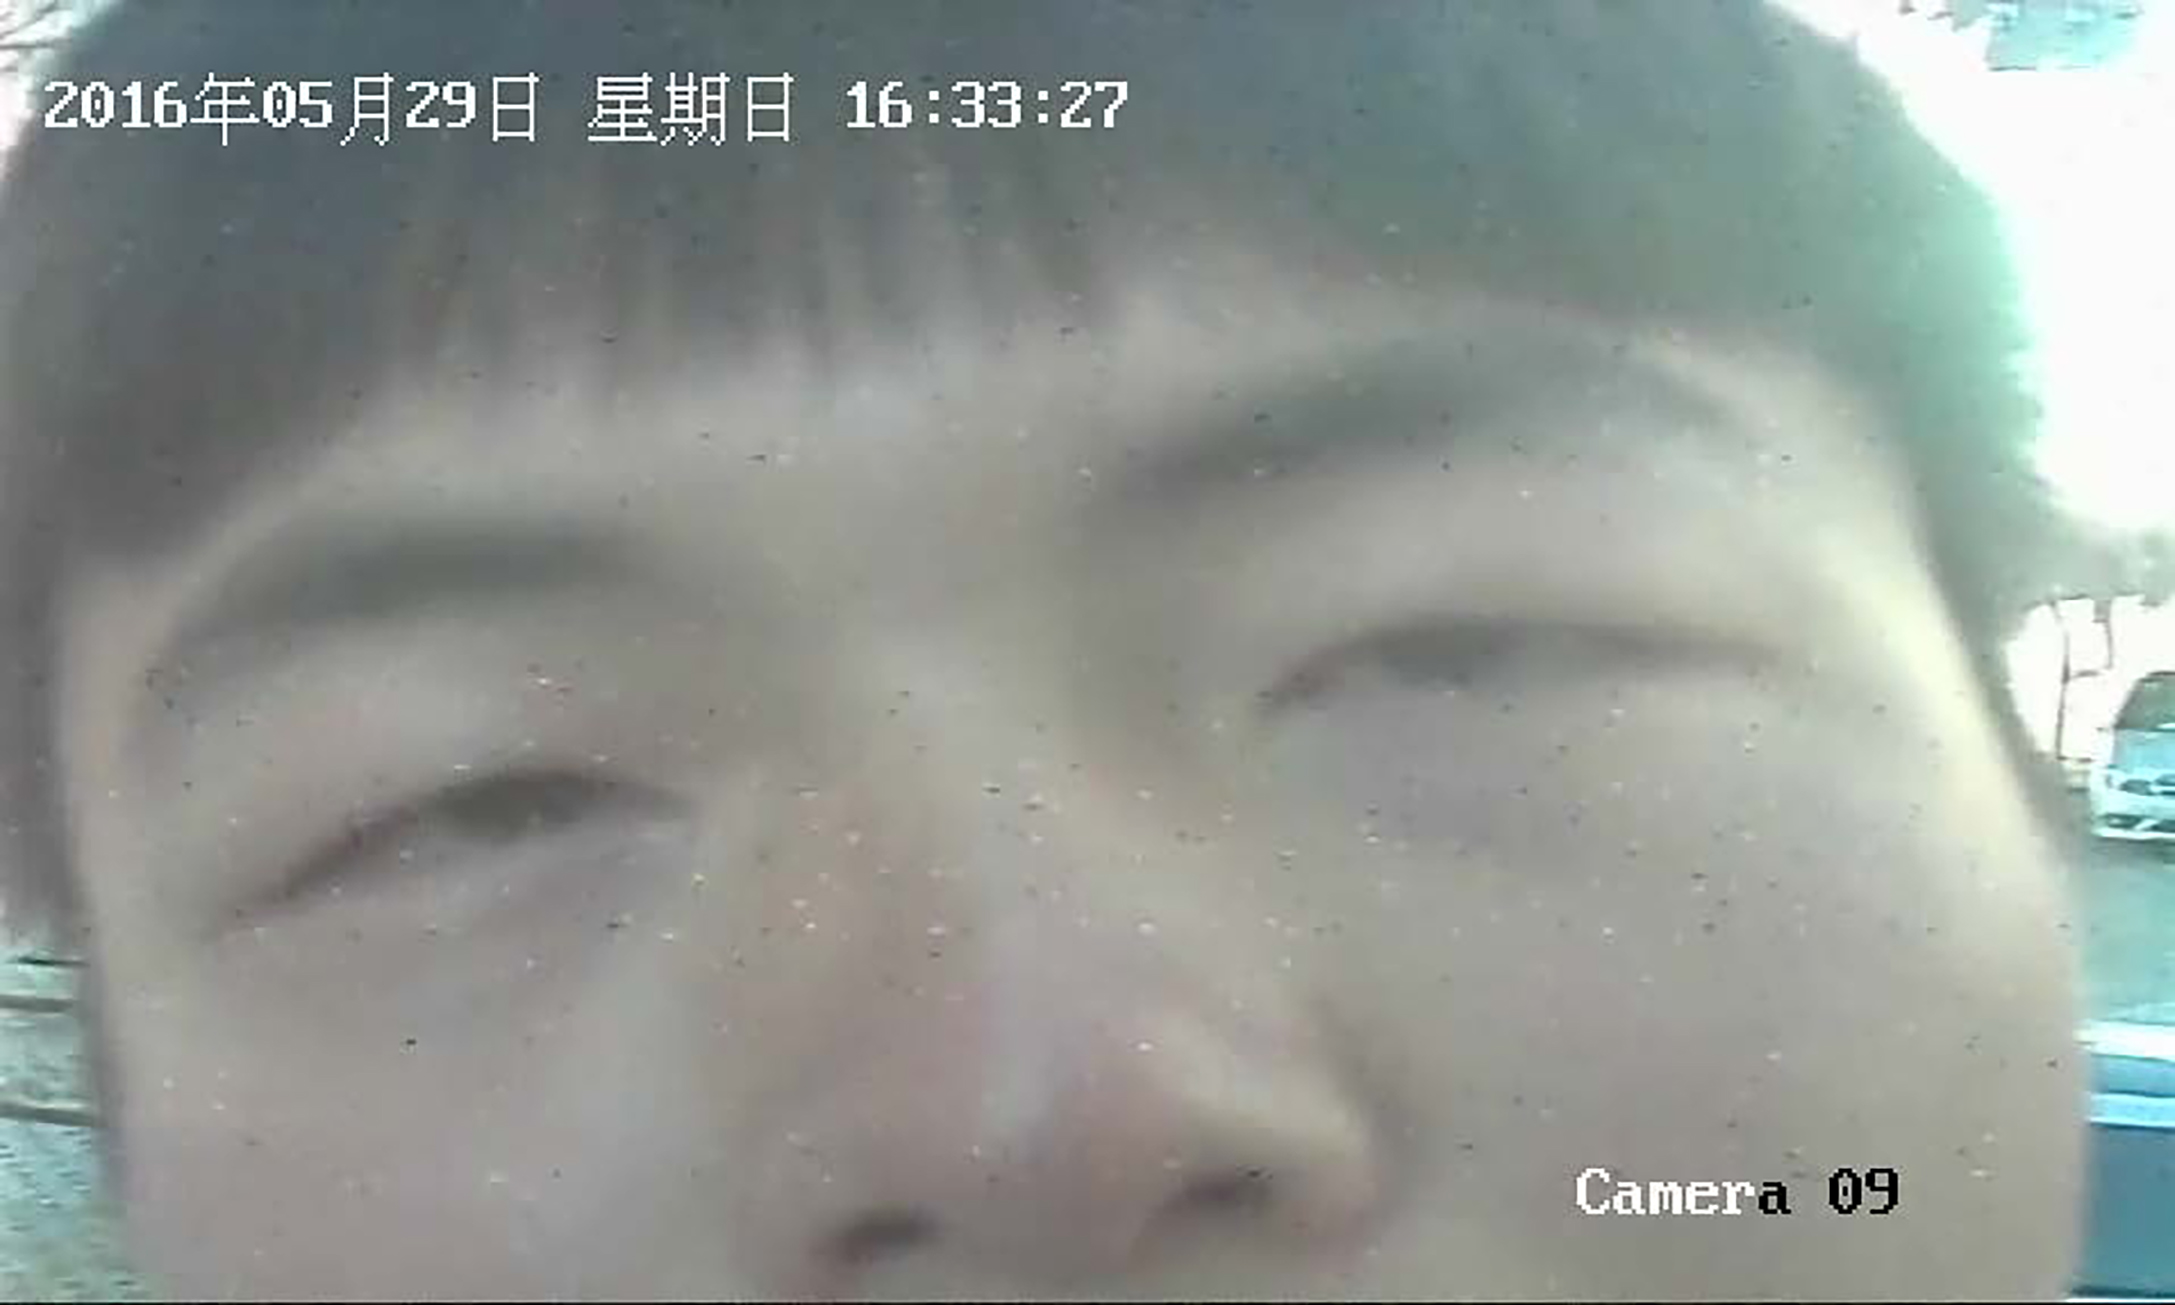 Artist, Ge Yulu stares directly into a surveillance camera, the shot is from the point of view of the security camera